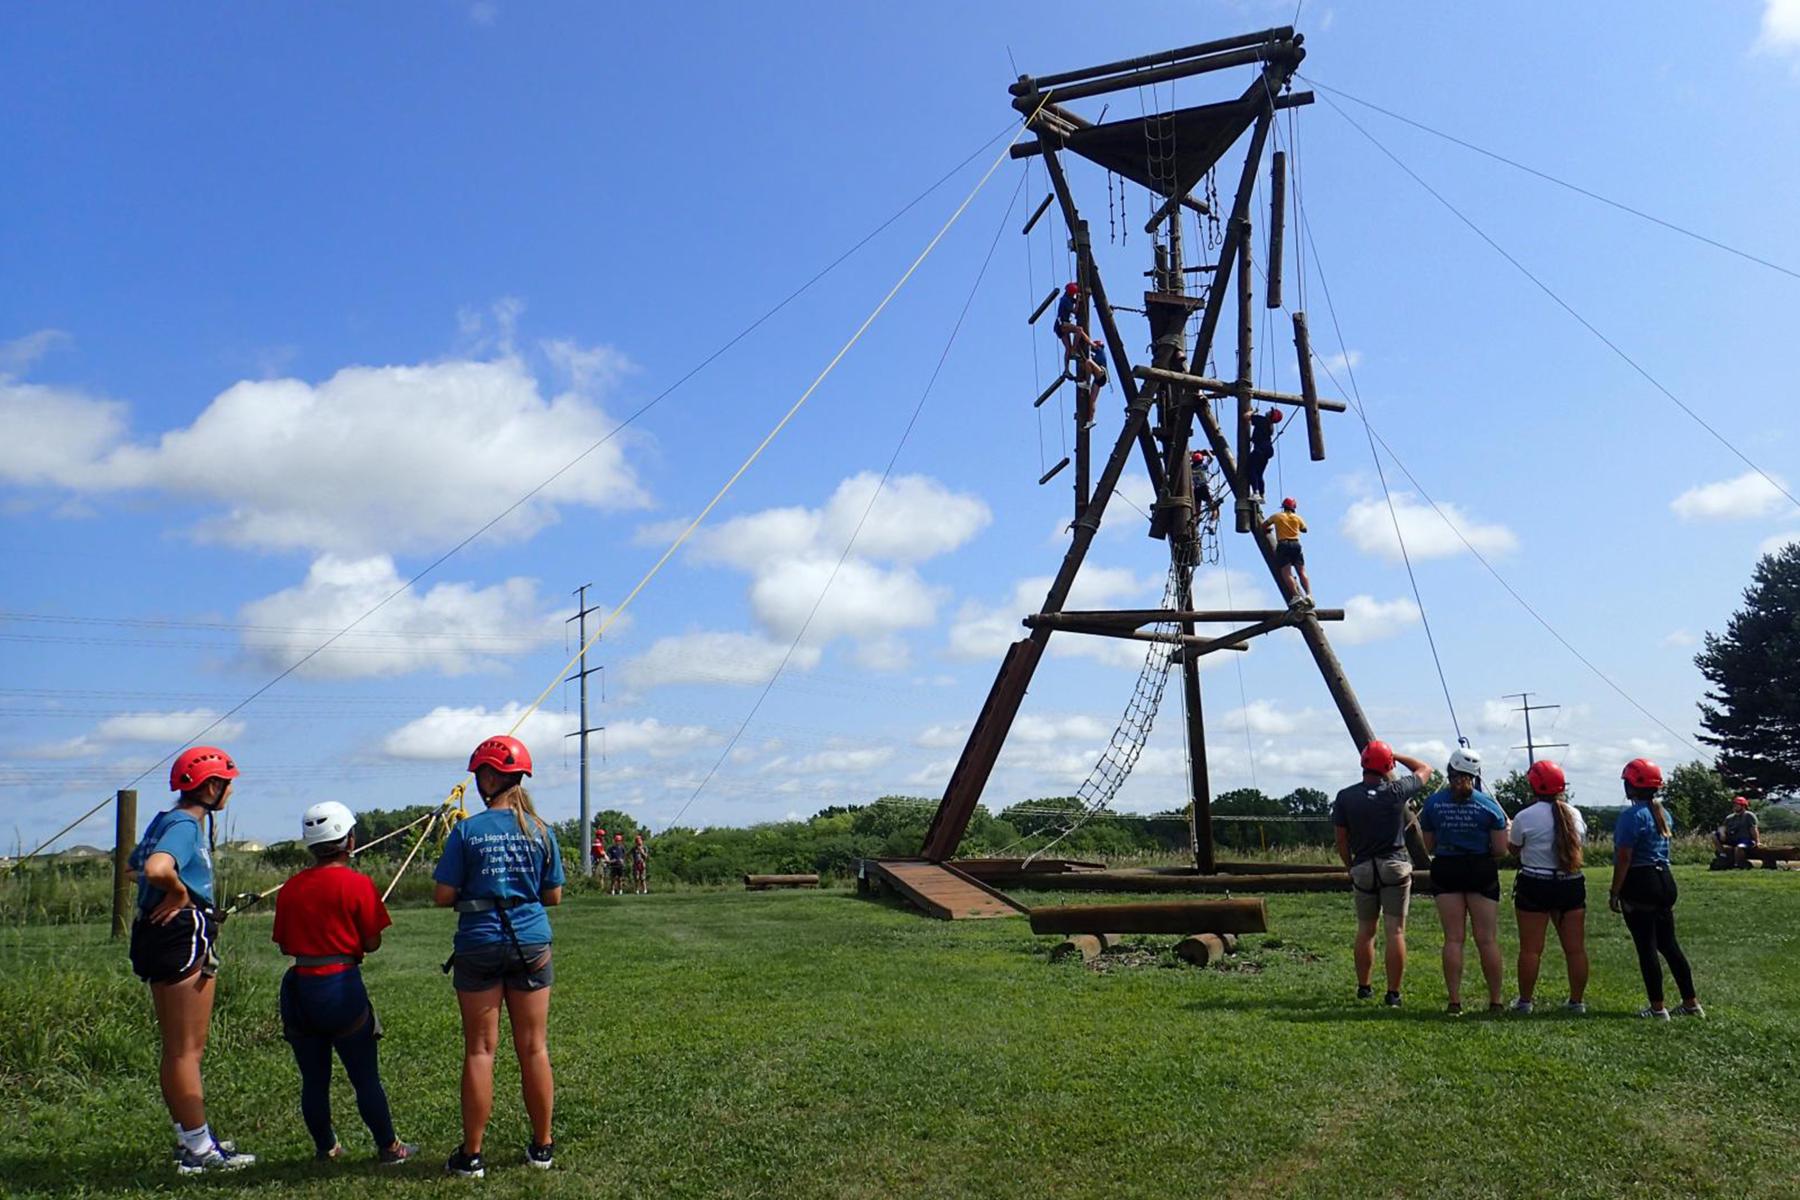 Individuals participate on the challenge course at the Leadership Training Center.